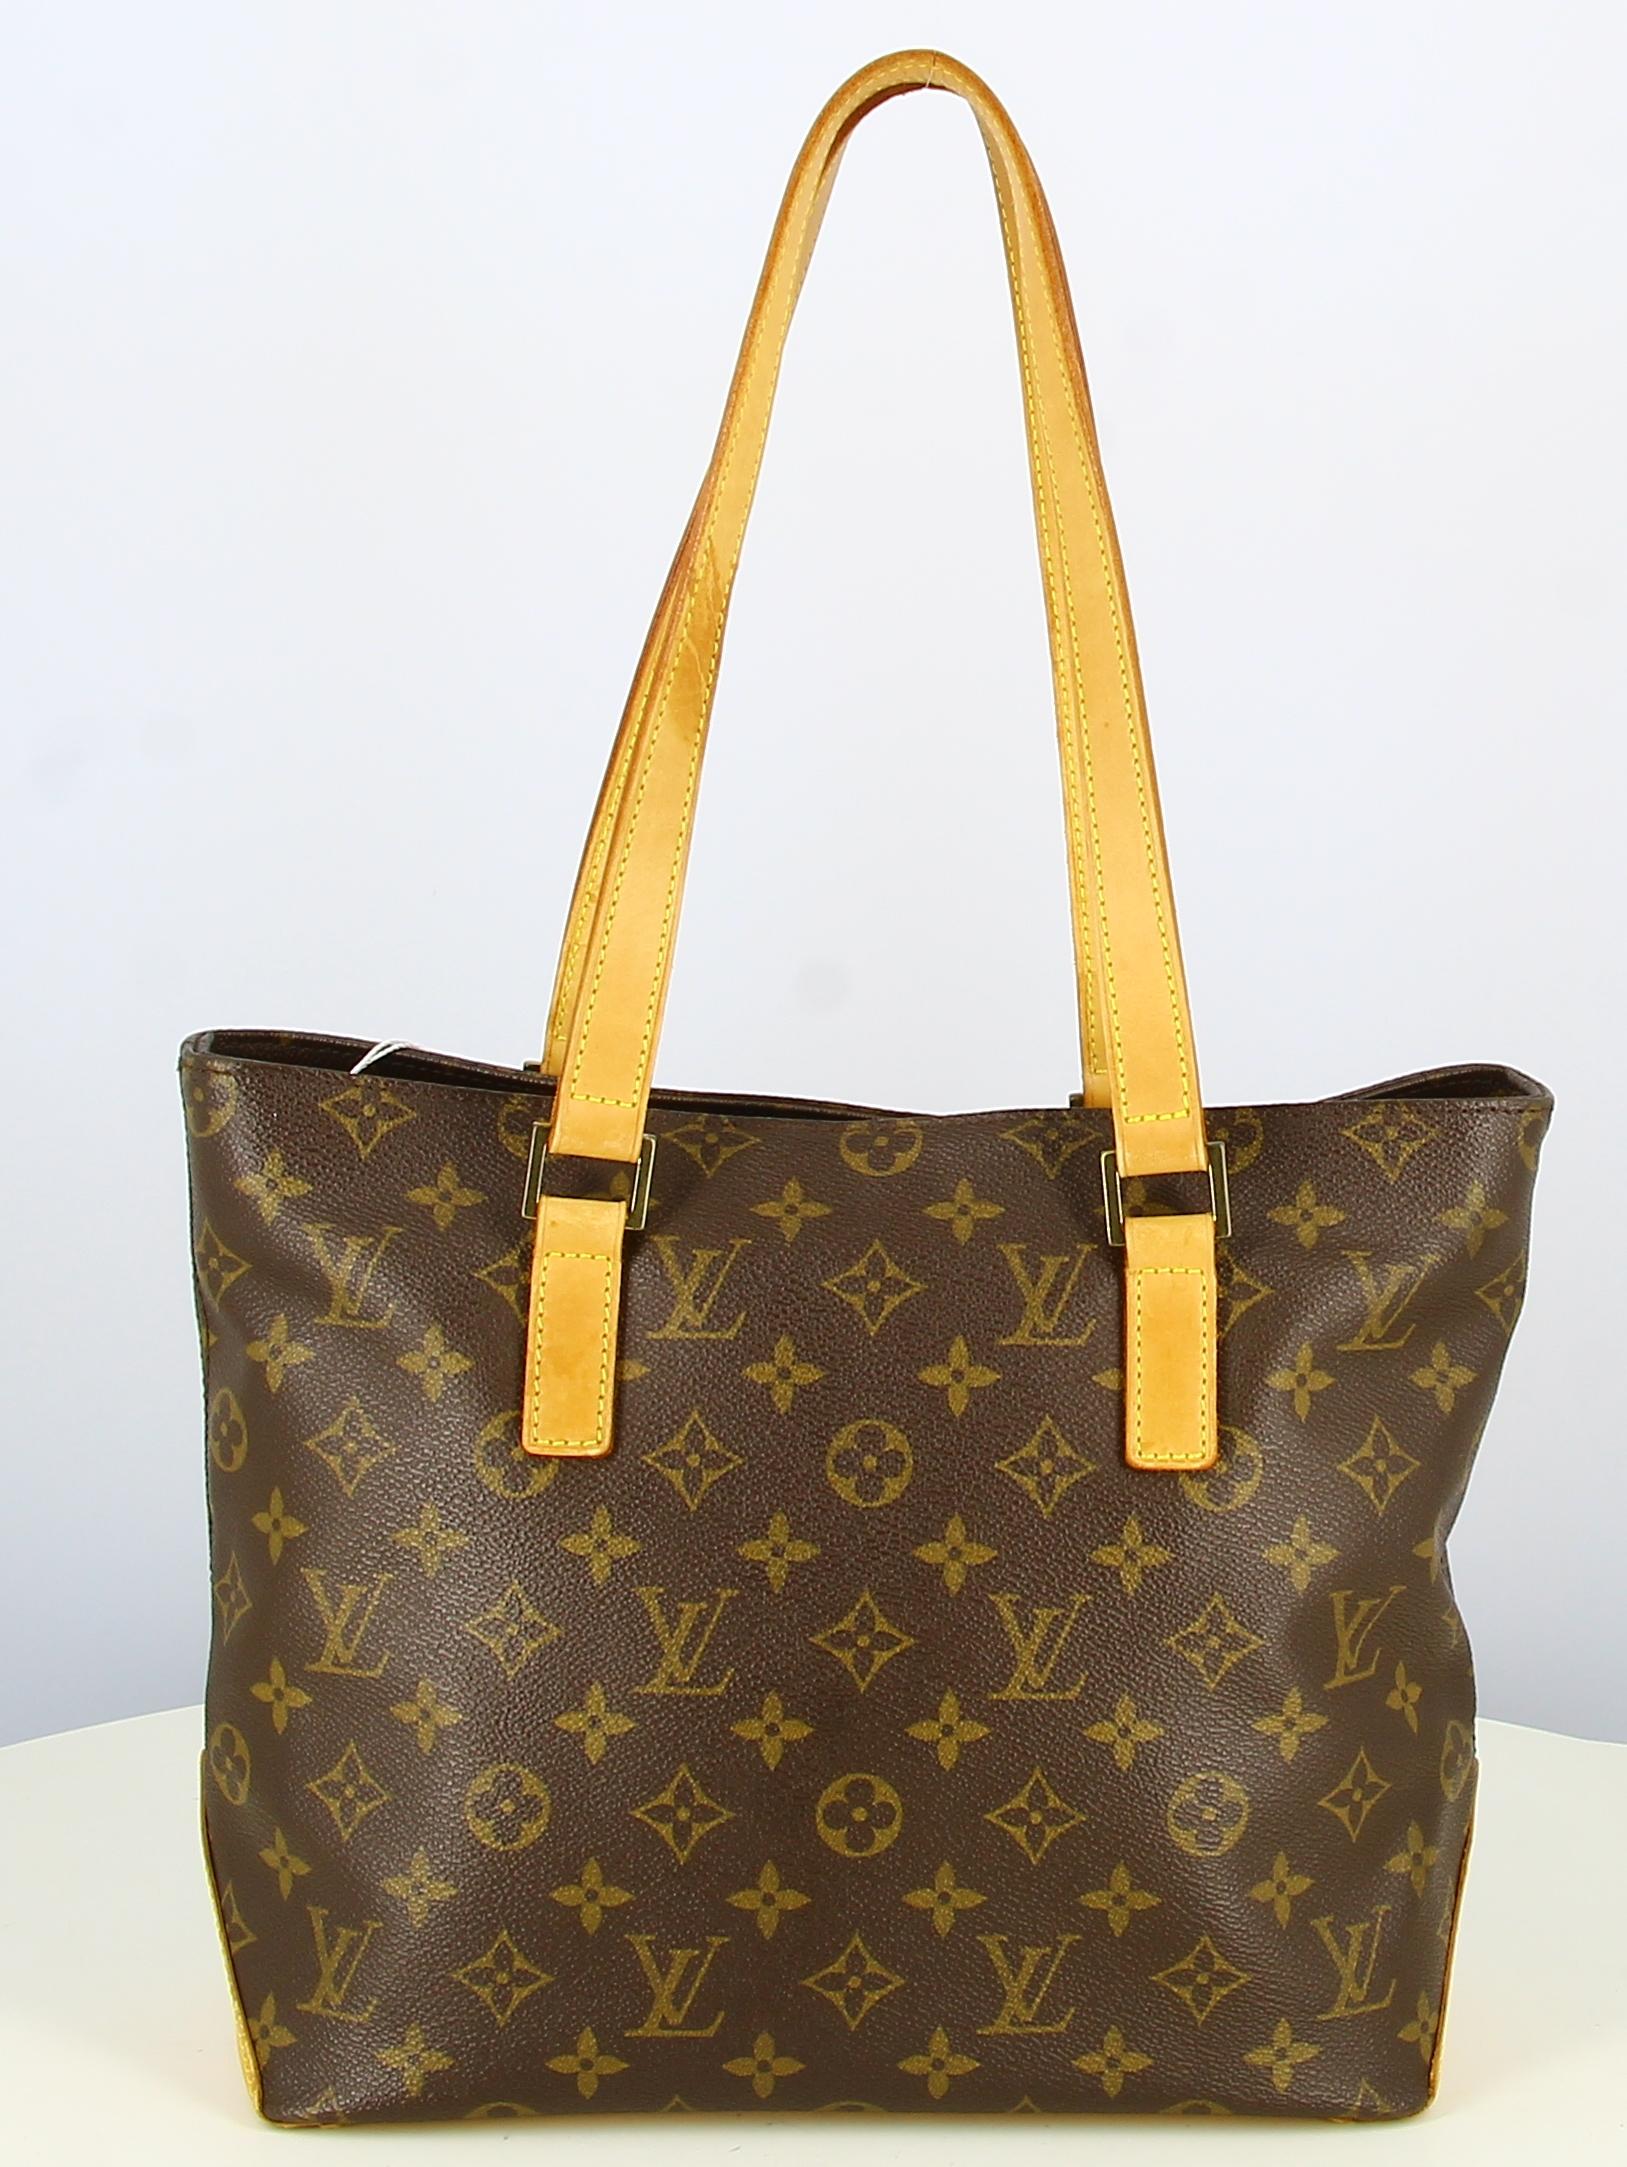 2002 Louis Vuitton Monogram Canvas Handbag 

- Very good condition. Shows very slight signs of wear over time.
- Louis Vuitton Handbag
- Canvas monogram
- Brown leather hanses
- Interior : Brown canvas. Small zipped pocket inside